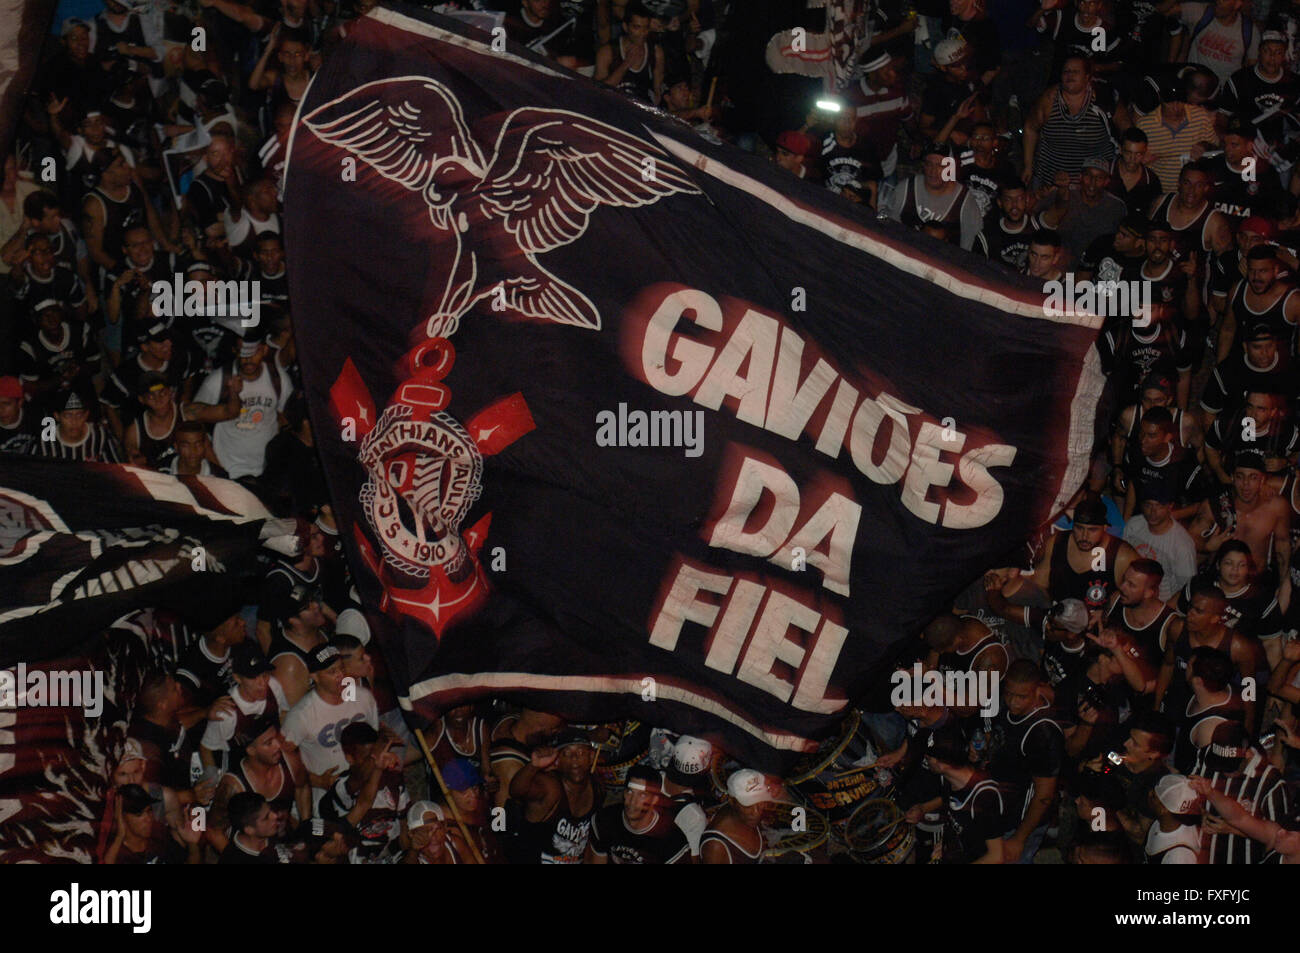 SAO PAULO, Brazil - 15/04/2016: ATO GAVI?ES IN ANHANGABA? - The Hawks of the Faithful, organized Corinthians fans, held protest in the Valley of Anhangaba?, center, against the current management of football and against the Mafia meals in schools state. (Photo: Ricardo Bastos / FotoArena) Stock Photo